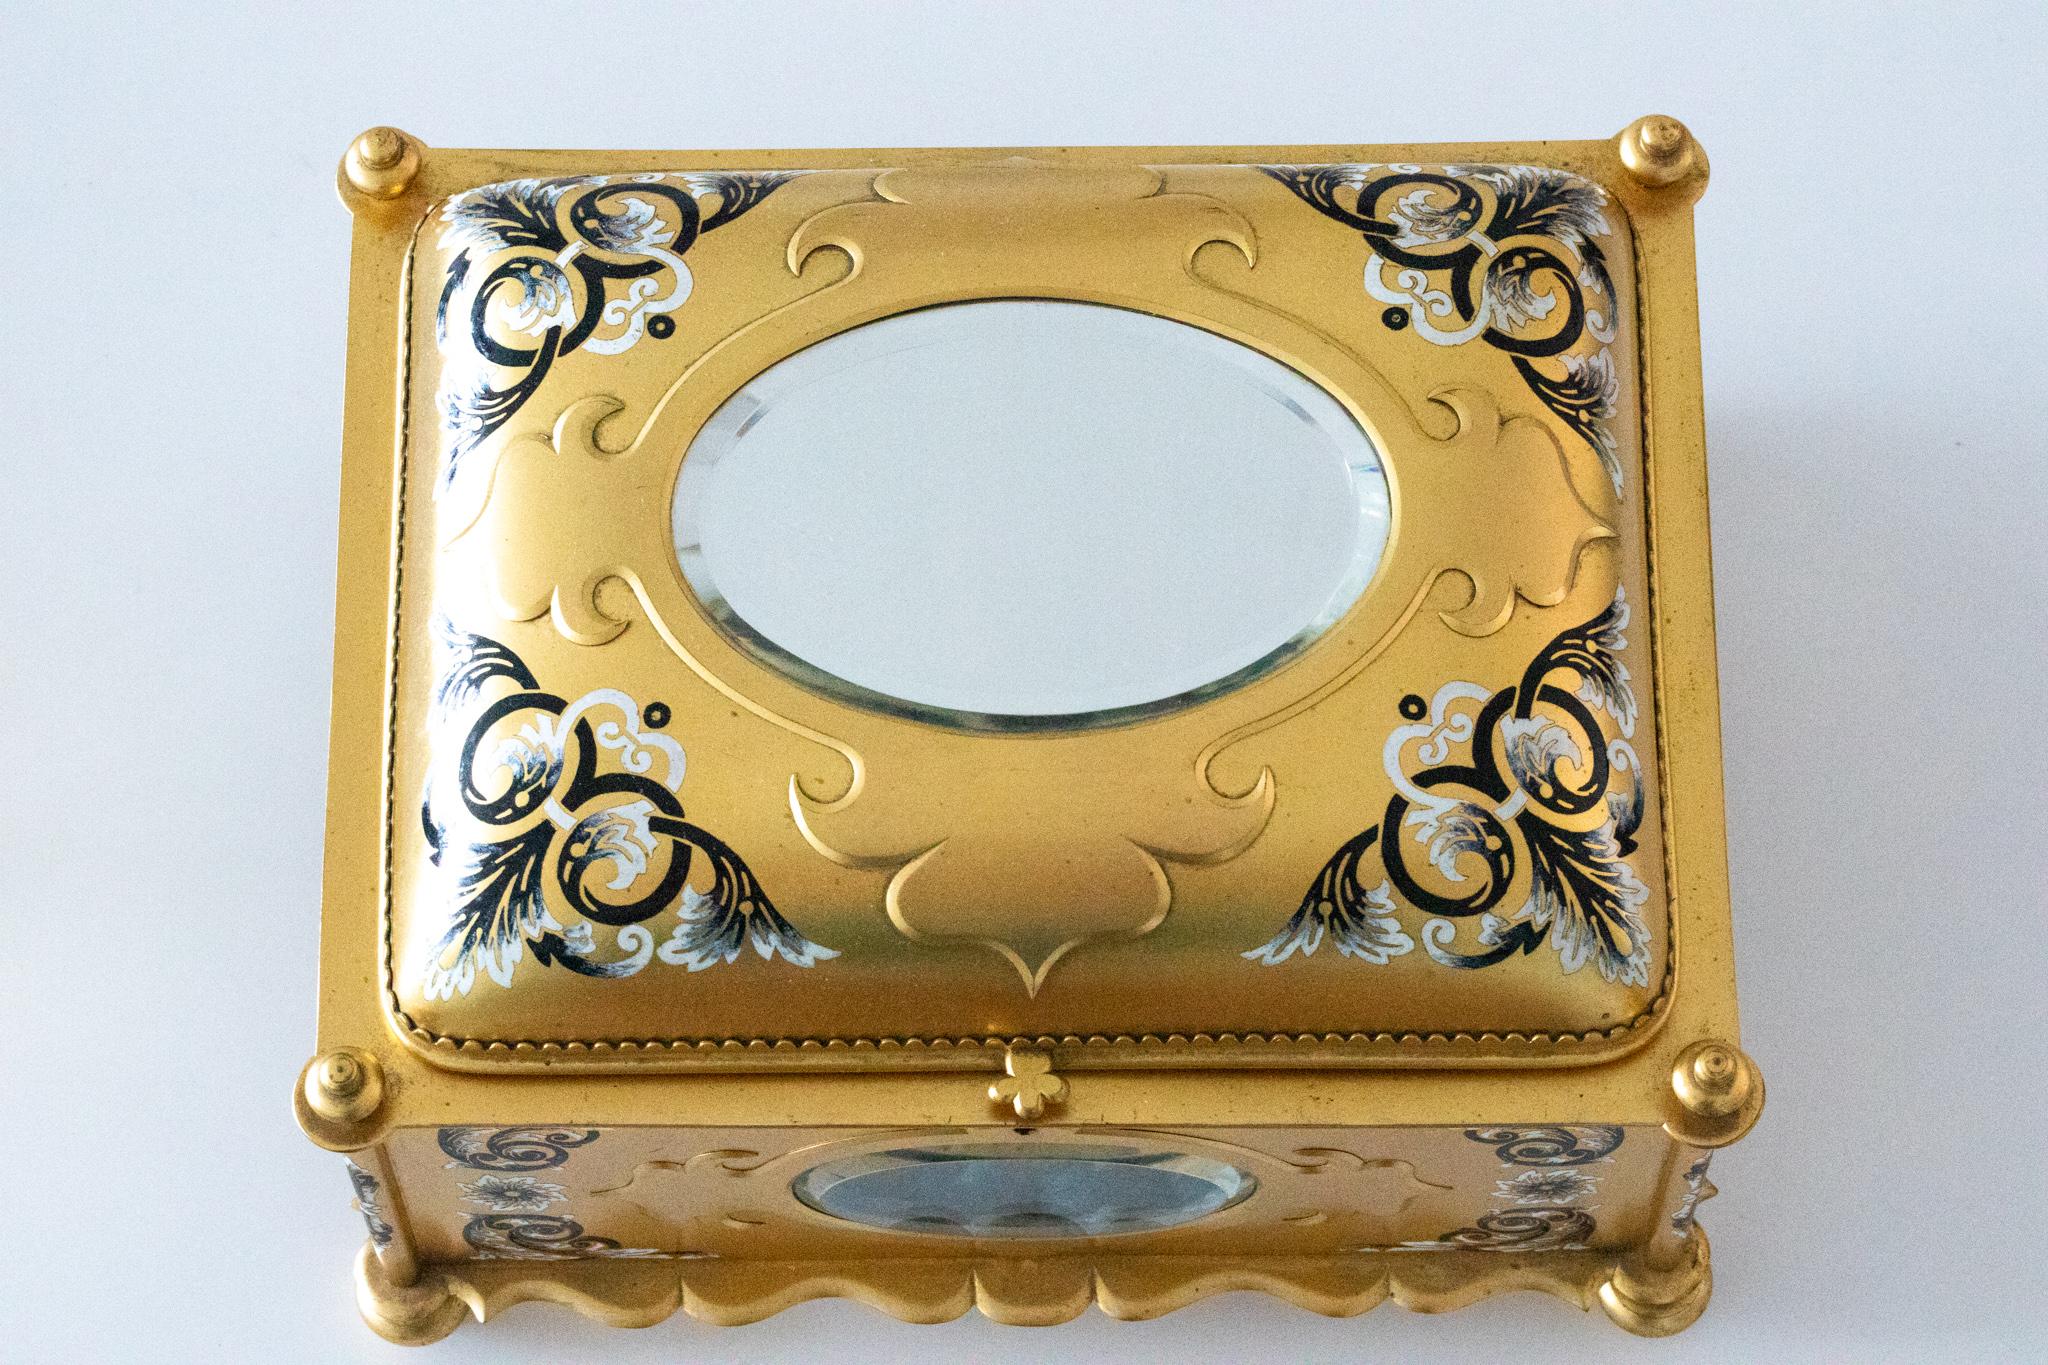 French France 1865 Etruscan Revival Ormolu Jewelry Box Case with Cloisonne Champleve